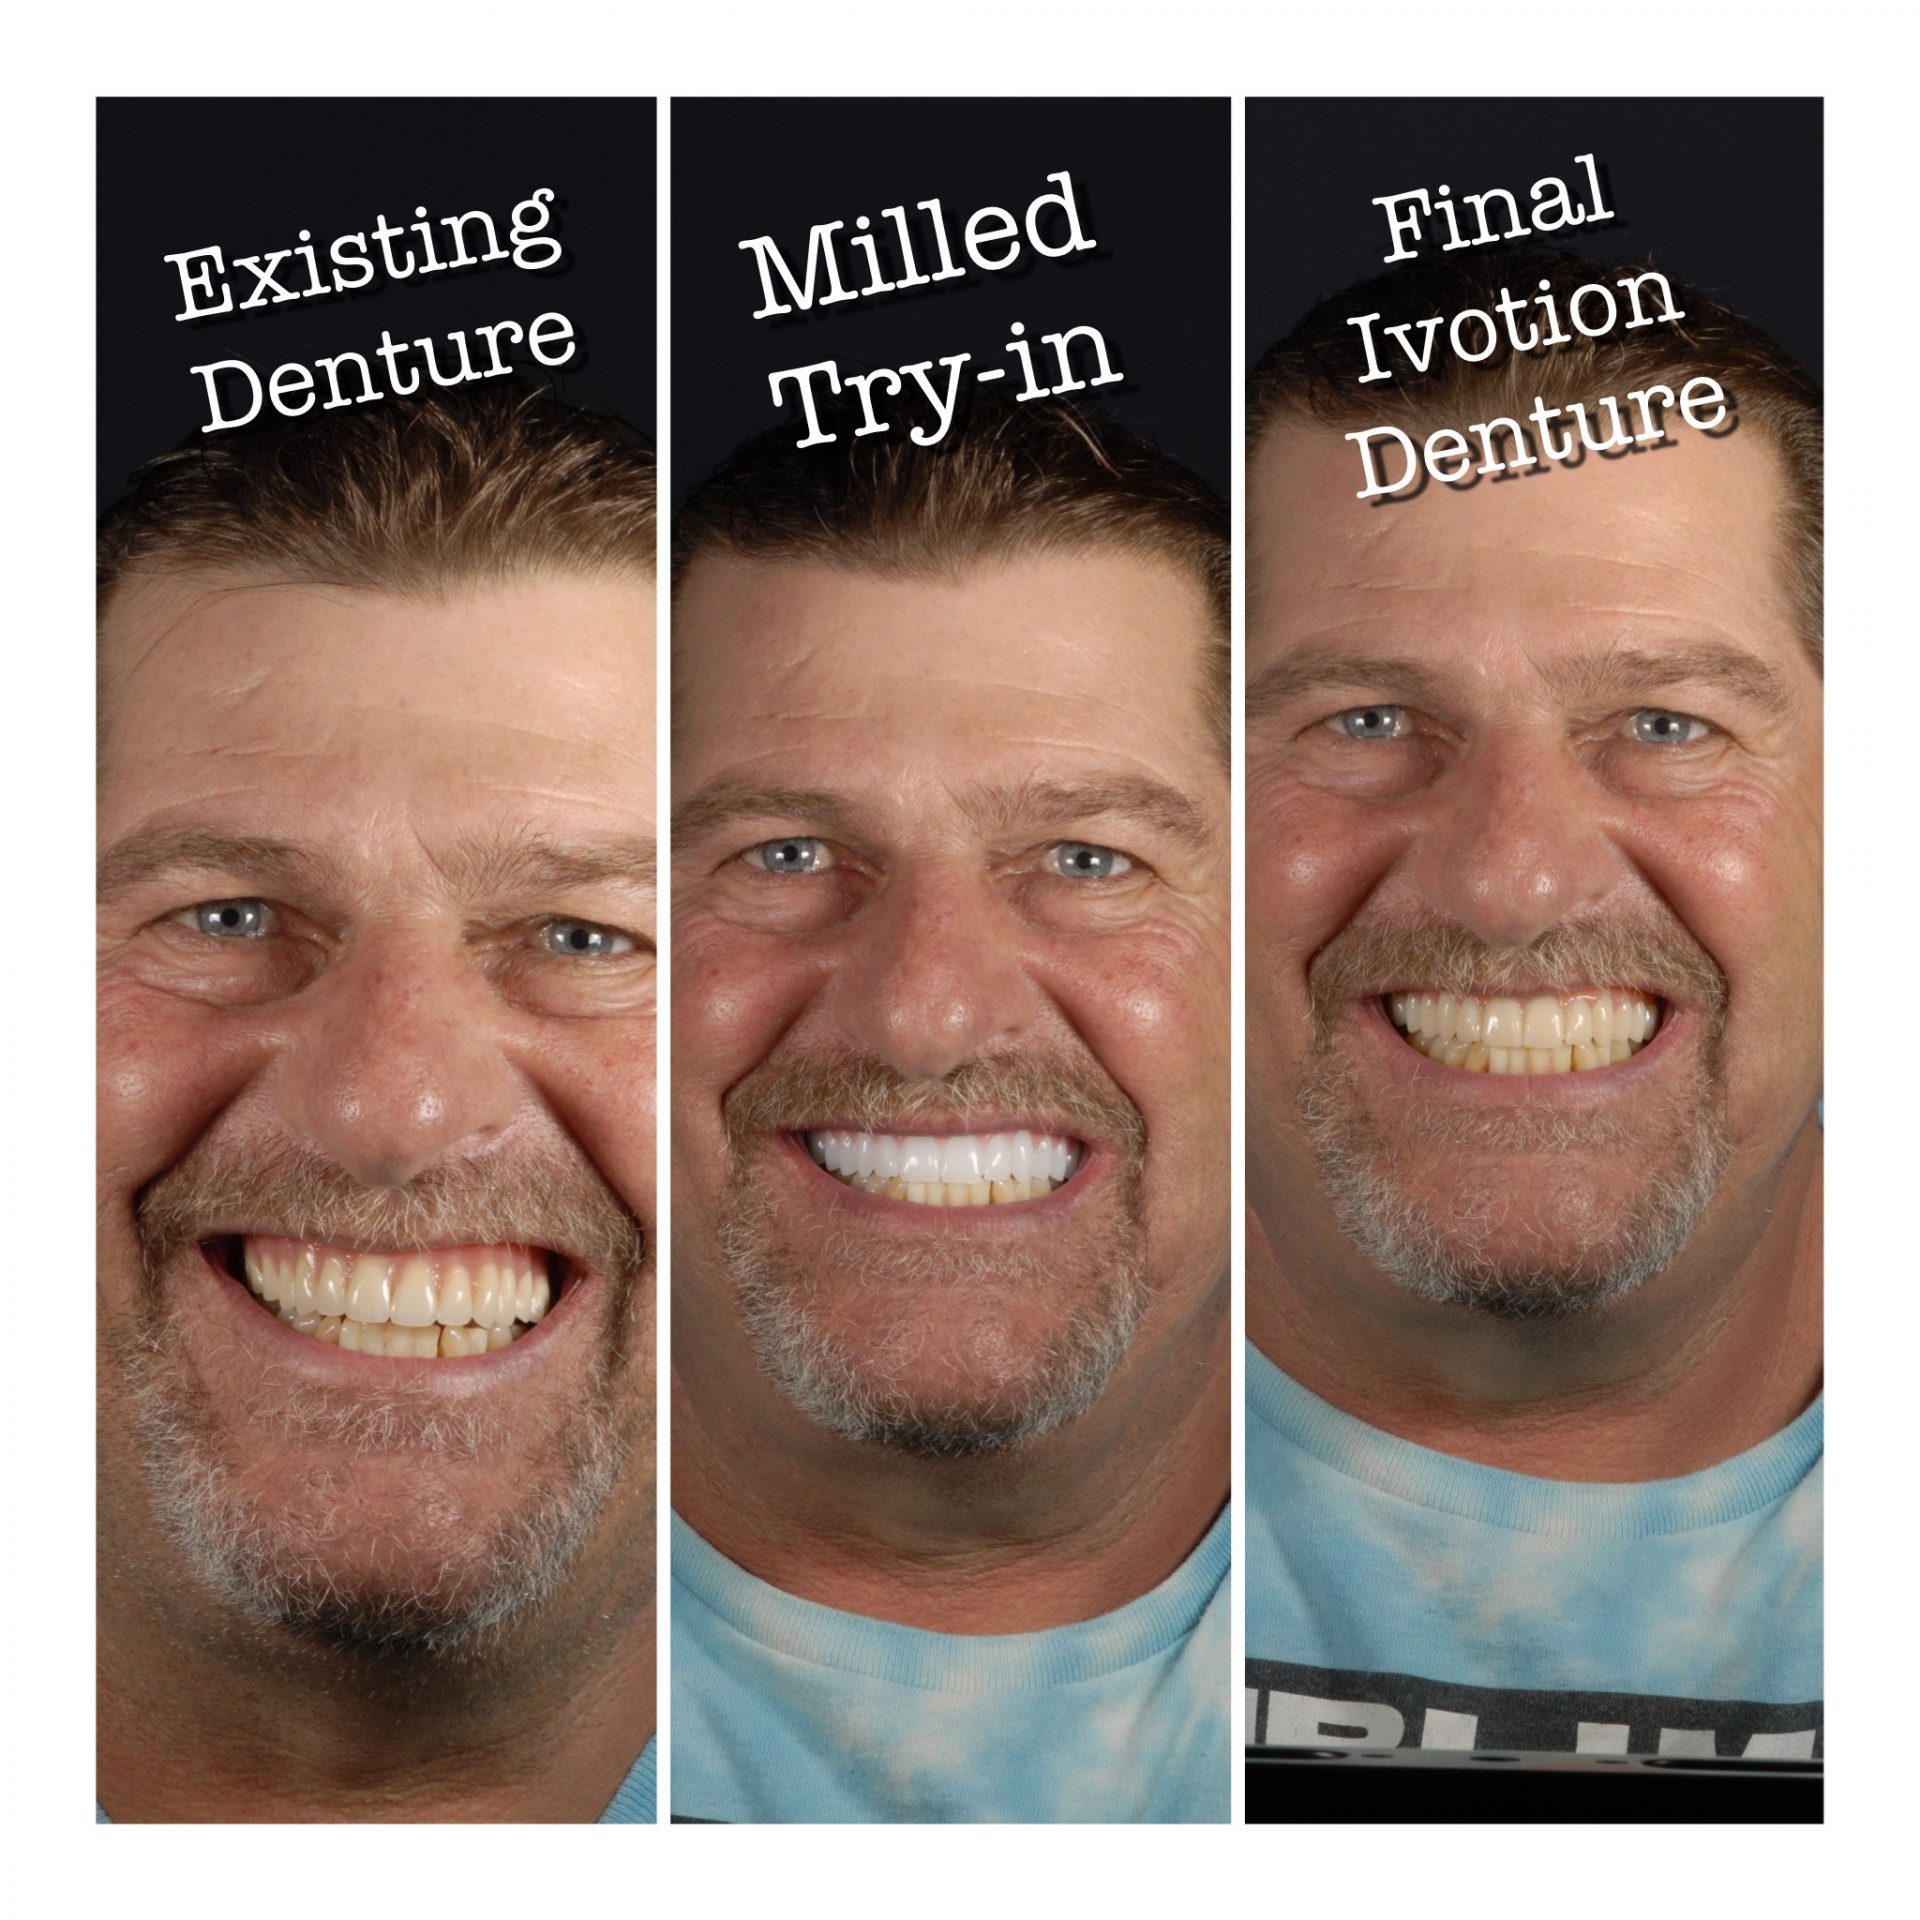 Image in 3 oblong sections, man smiling in all three first "existing denture", second, "Milled Try-in", Third "Final Ivotion Denture"